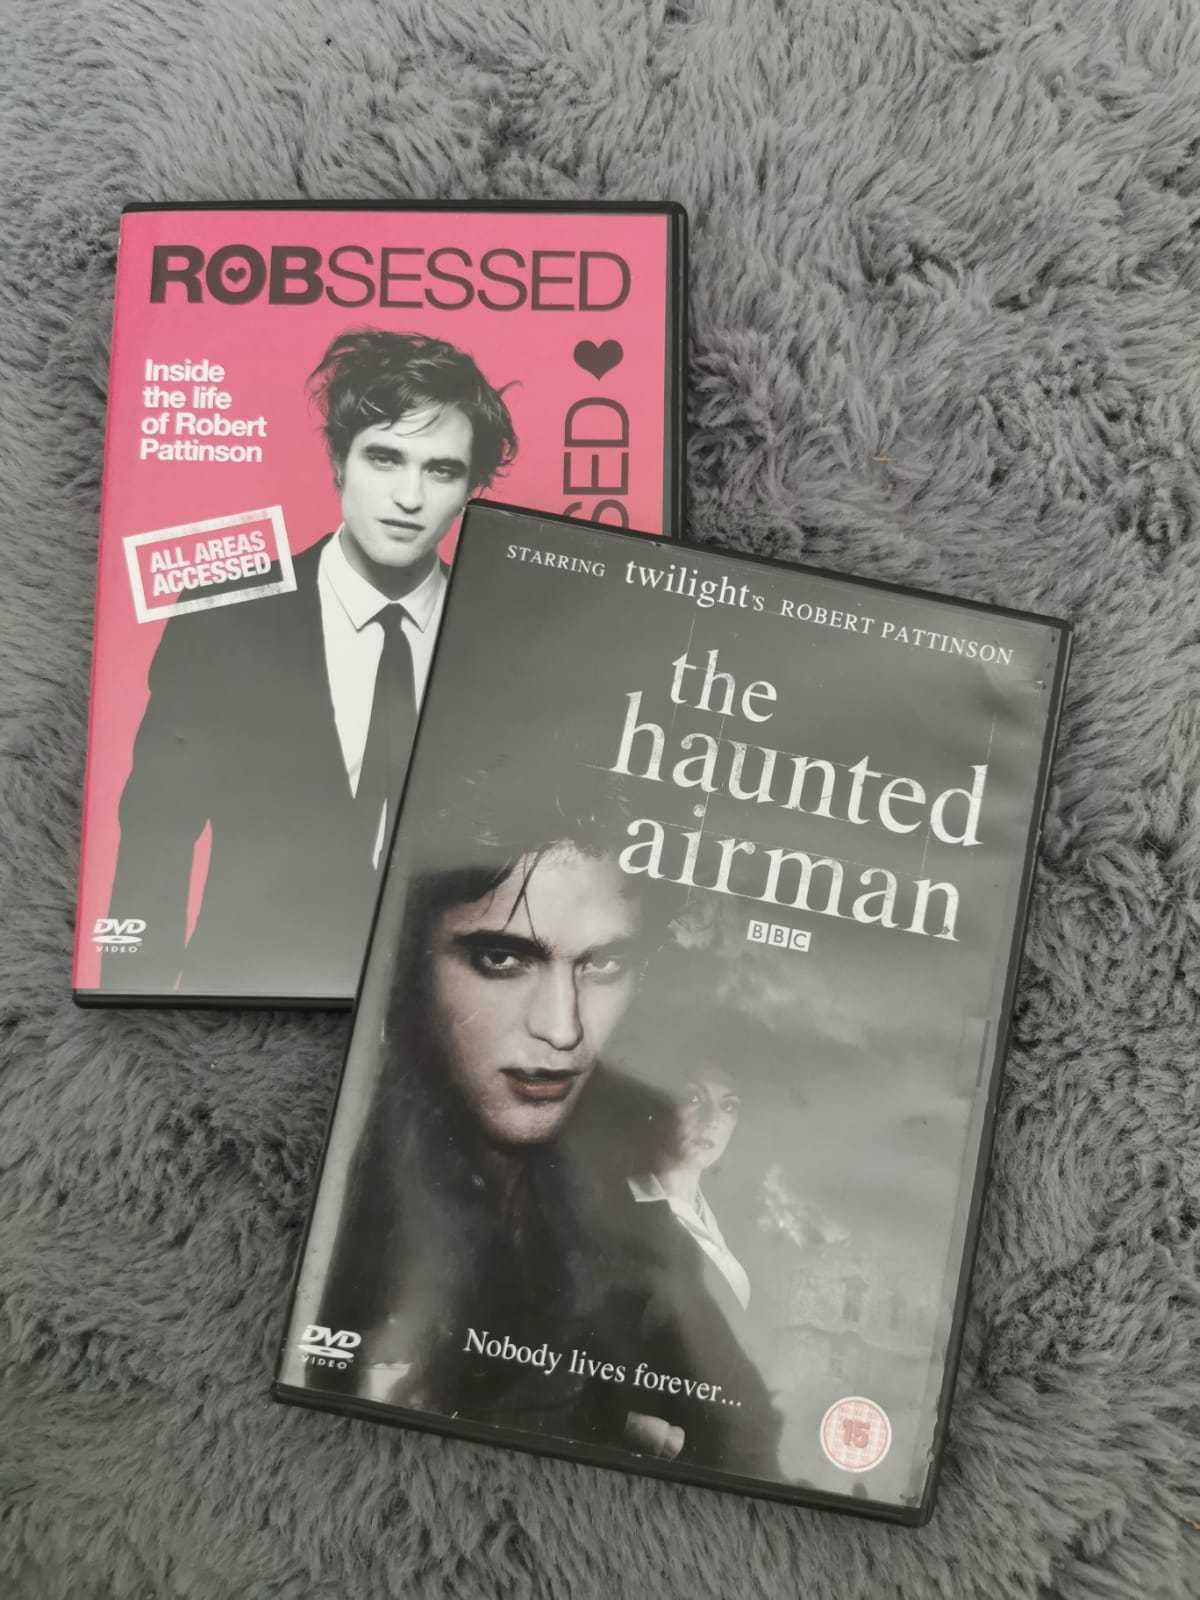 Film DVD The Haunted Airman with Robert Pattinson + Robsessed